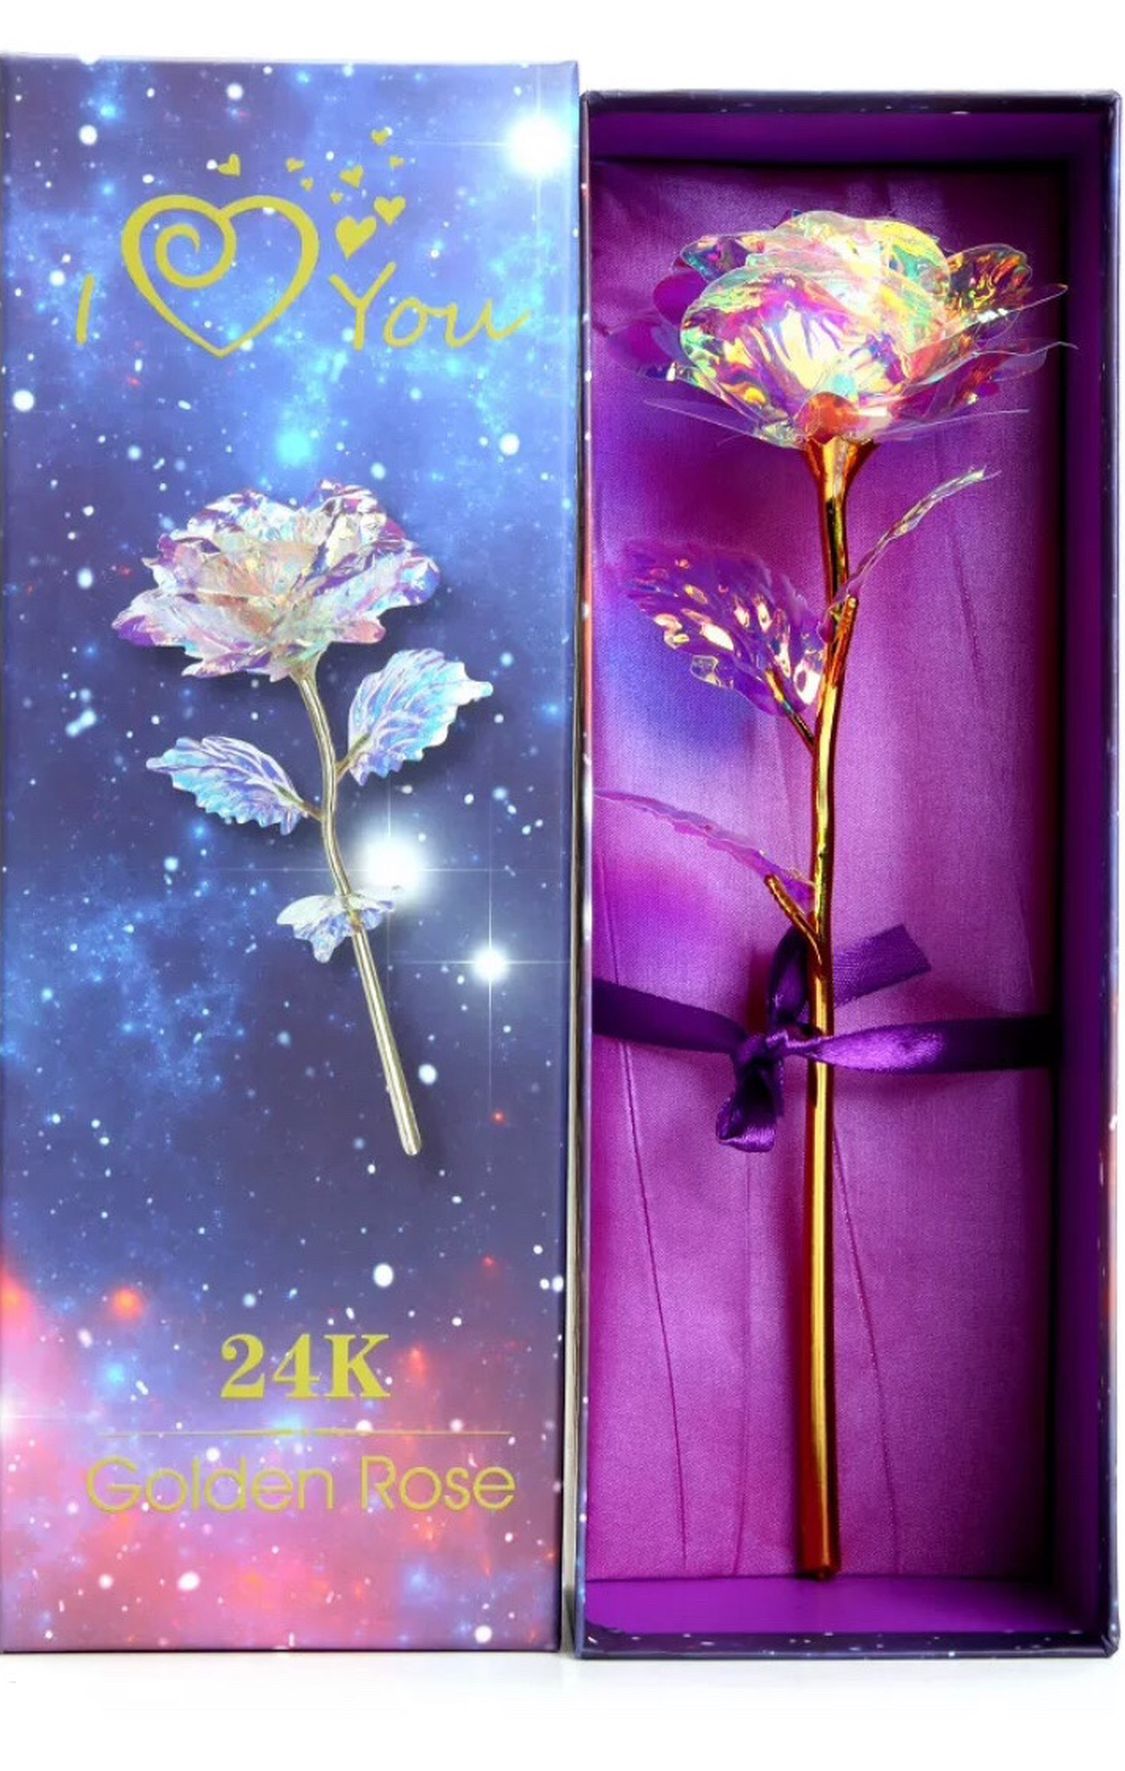 24k Crystal Foil Gift Box Colorful Gold Rose Lasts Forever Decoration For Any Especial Occasion Mothers Day, Girlfriend, Friend And Family